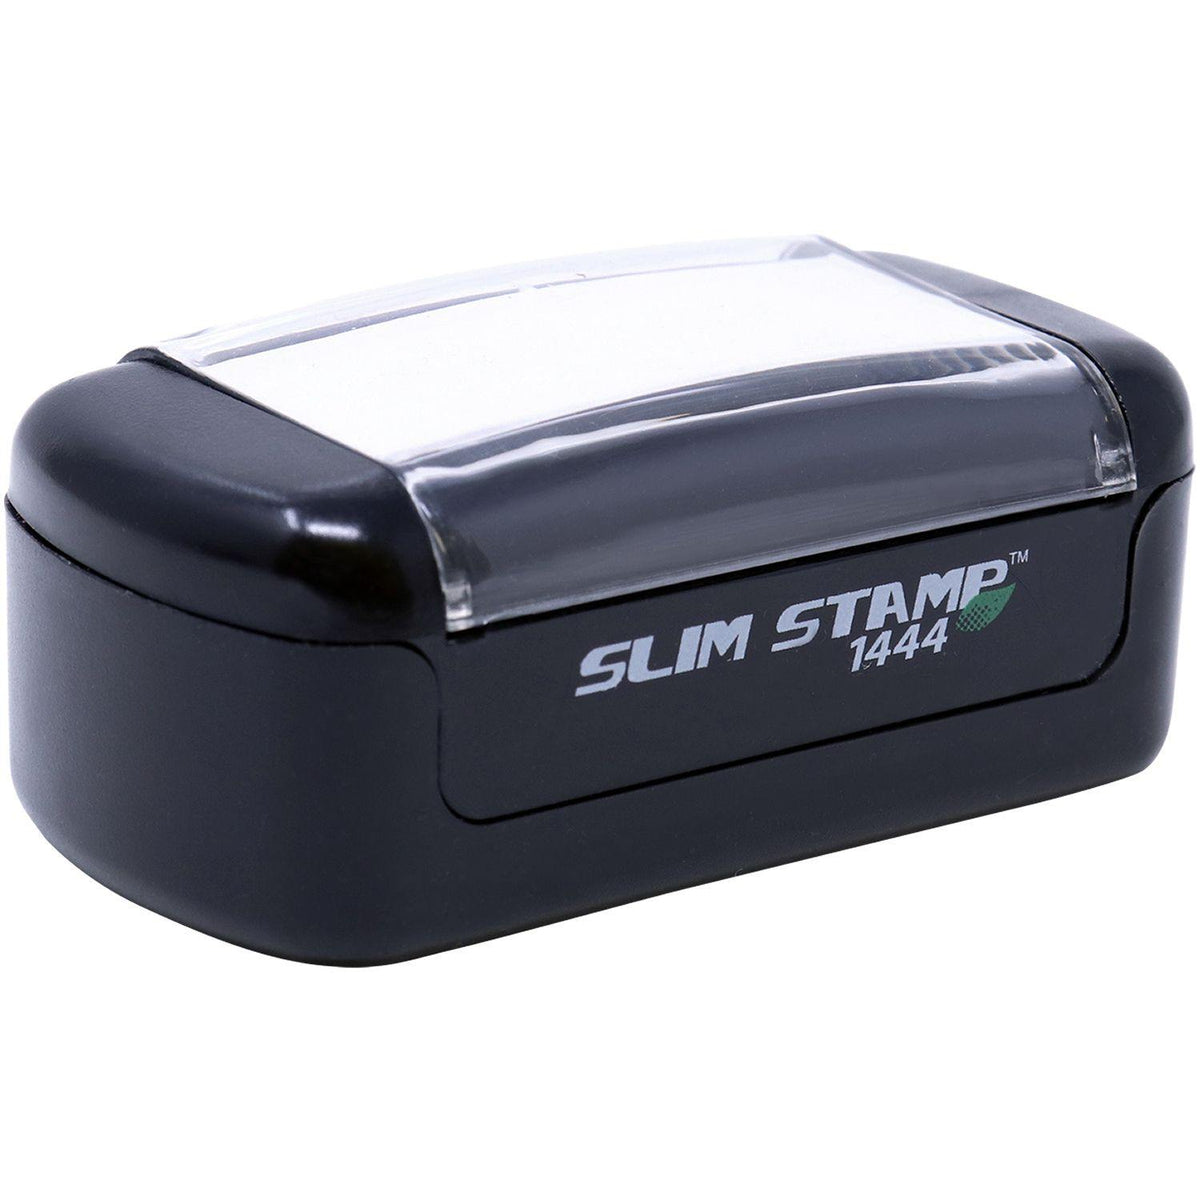 Alt View of Slim Pre-Inked Standard Mail A Stamp Mount Angle